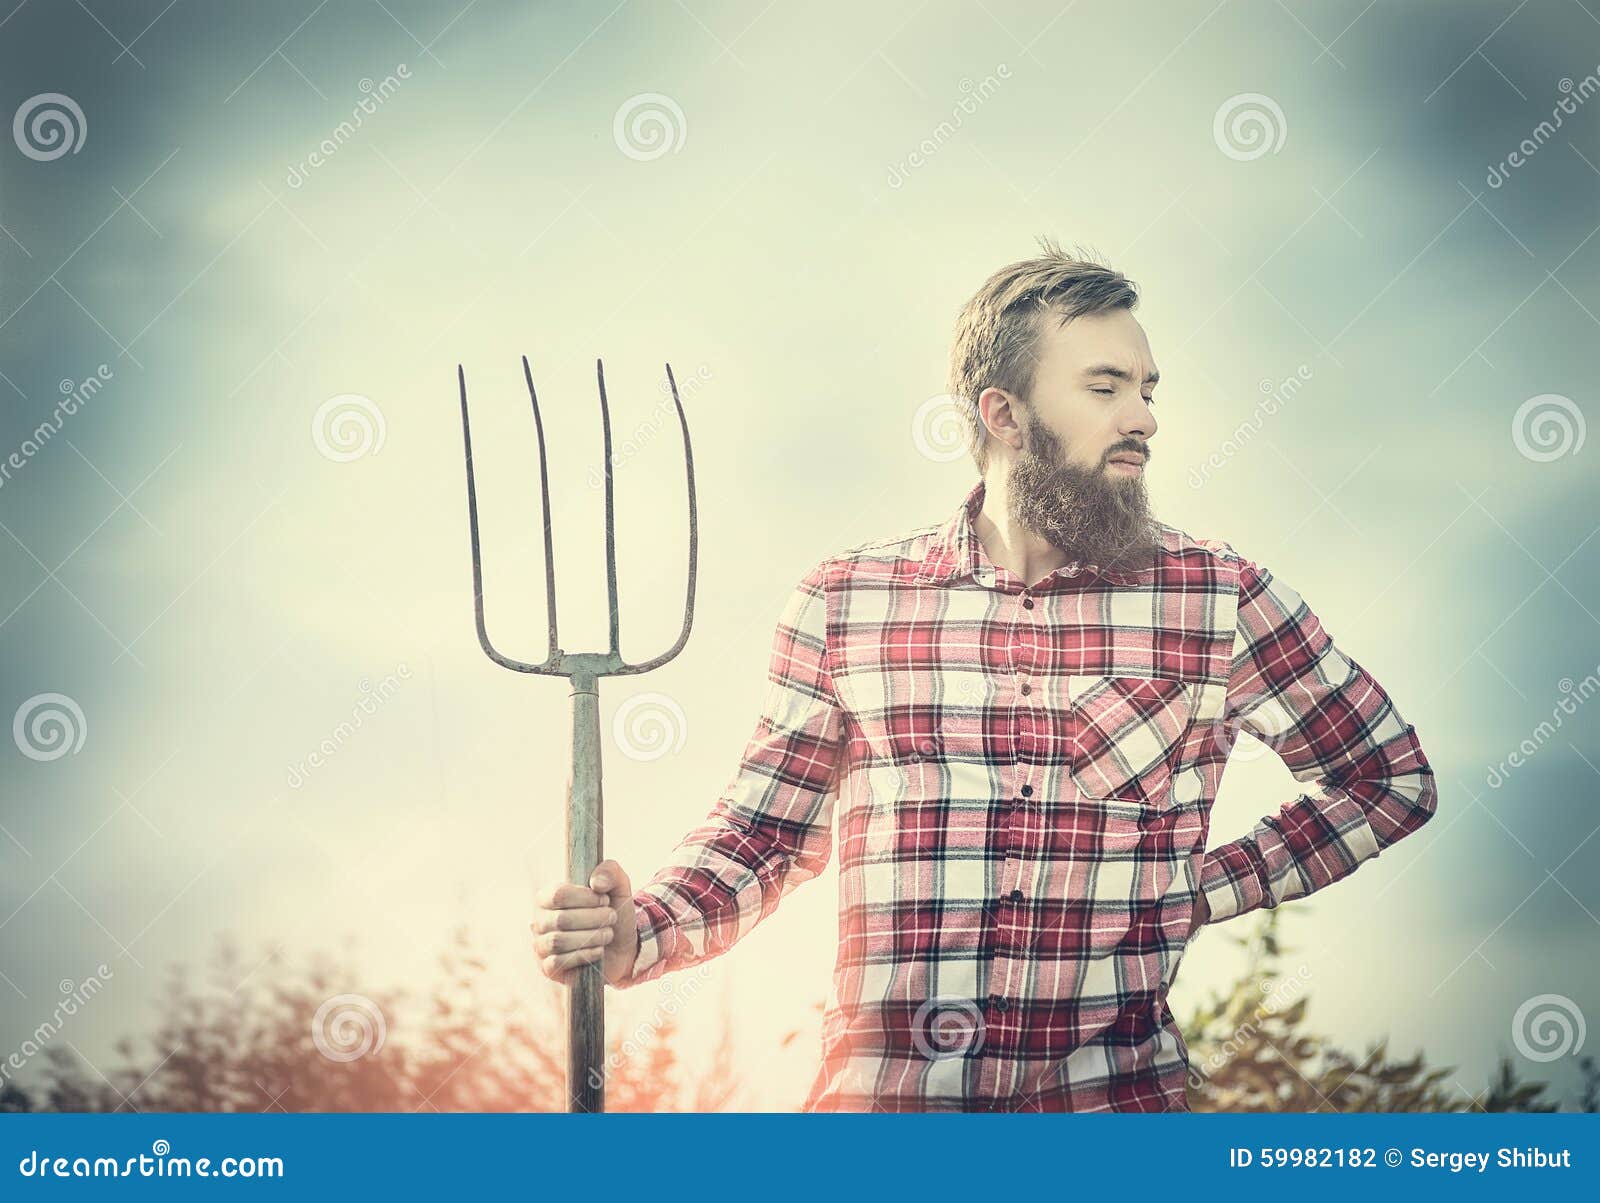 young bearded farmer in red checkered shirt with old pitchfork sky nature backgrund, toned